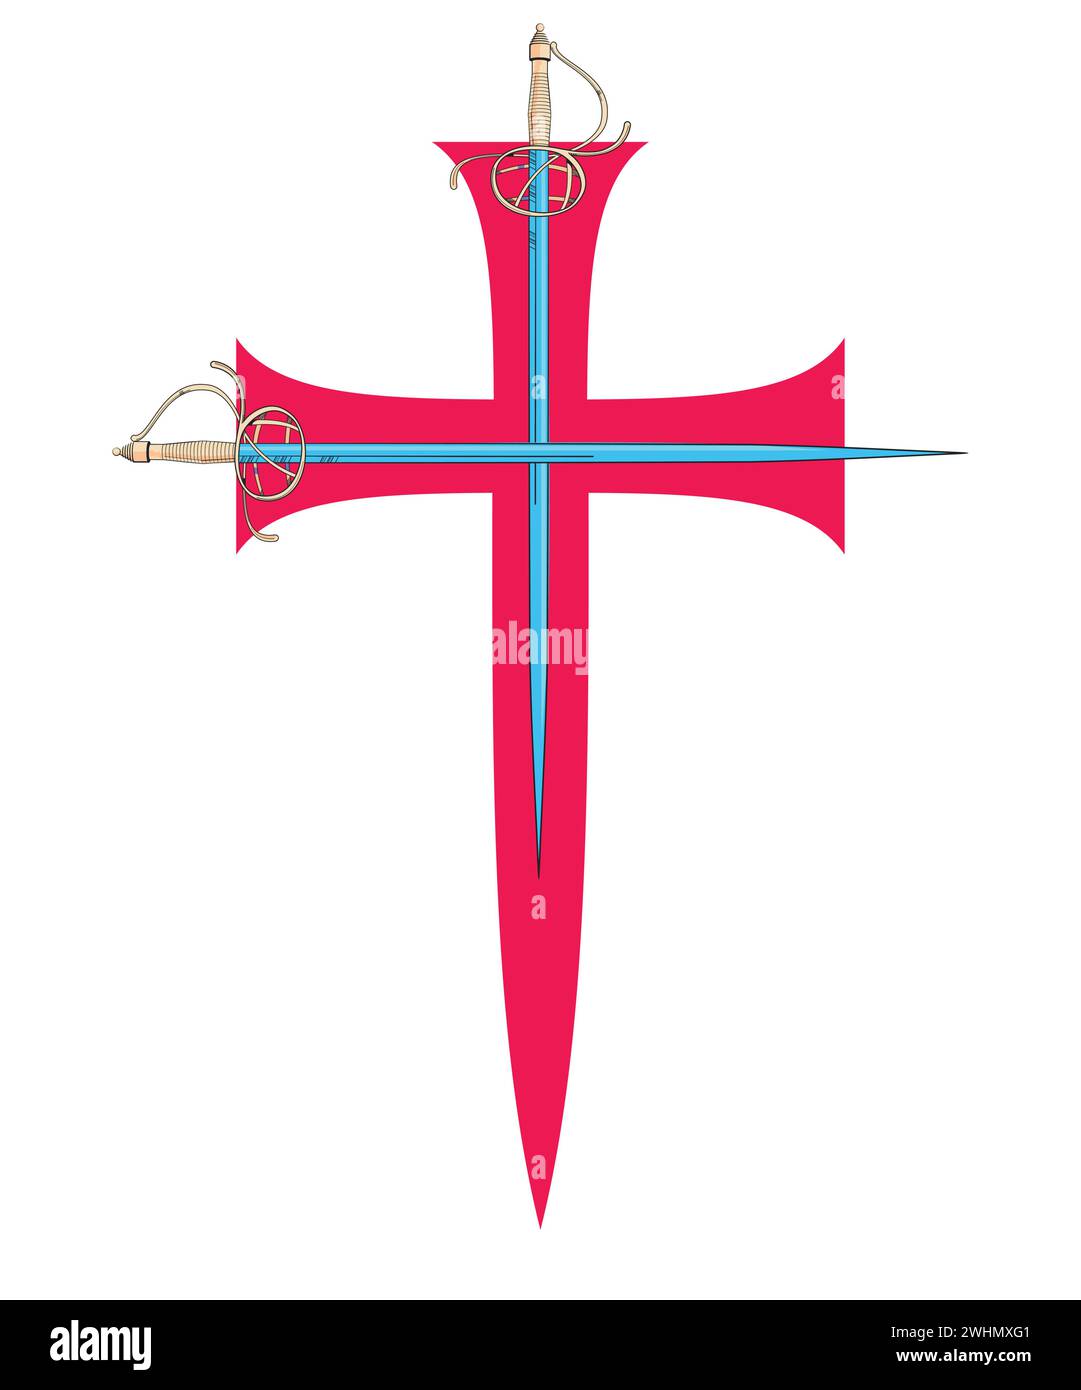 Vector illustration of two swords clashing over a red cross. Ideal design for chivalry and adventure comics. Stock Vector